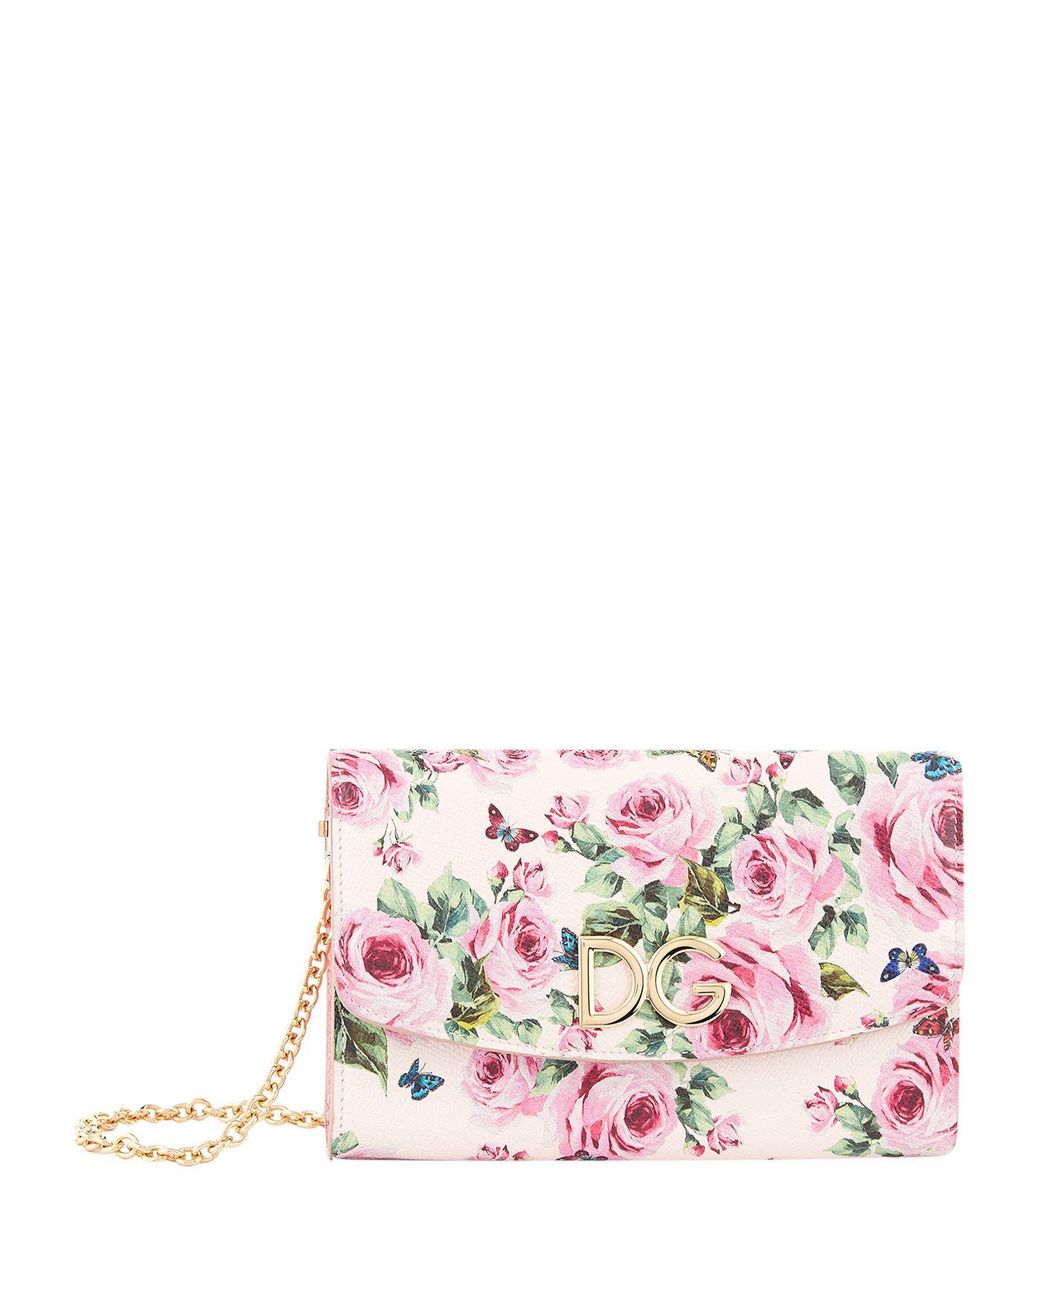 Dolce & Gabbana Rose Print Leather Wallet Bag in Pink | Lyst